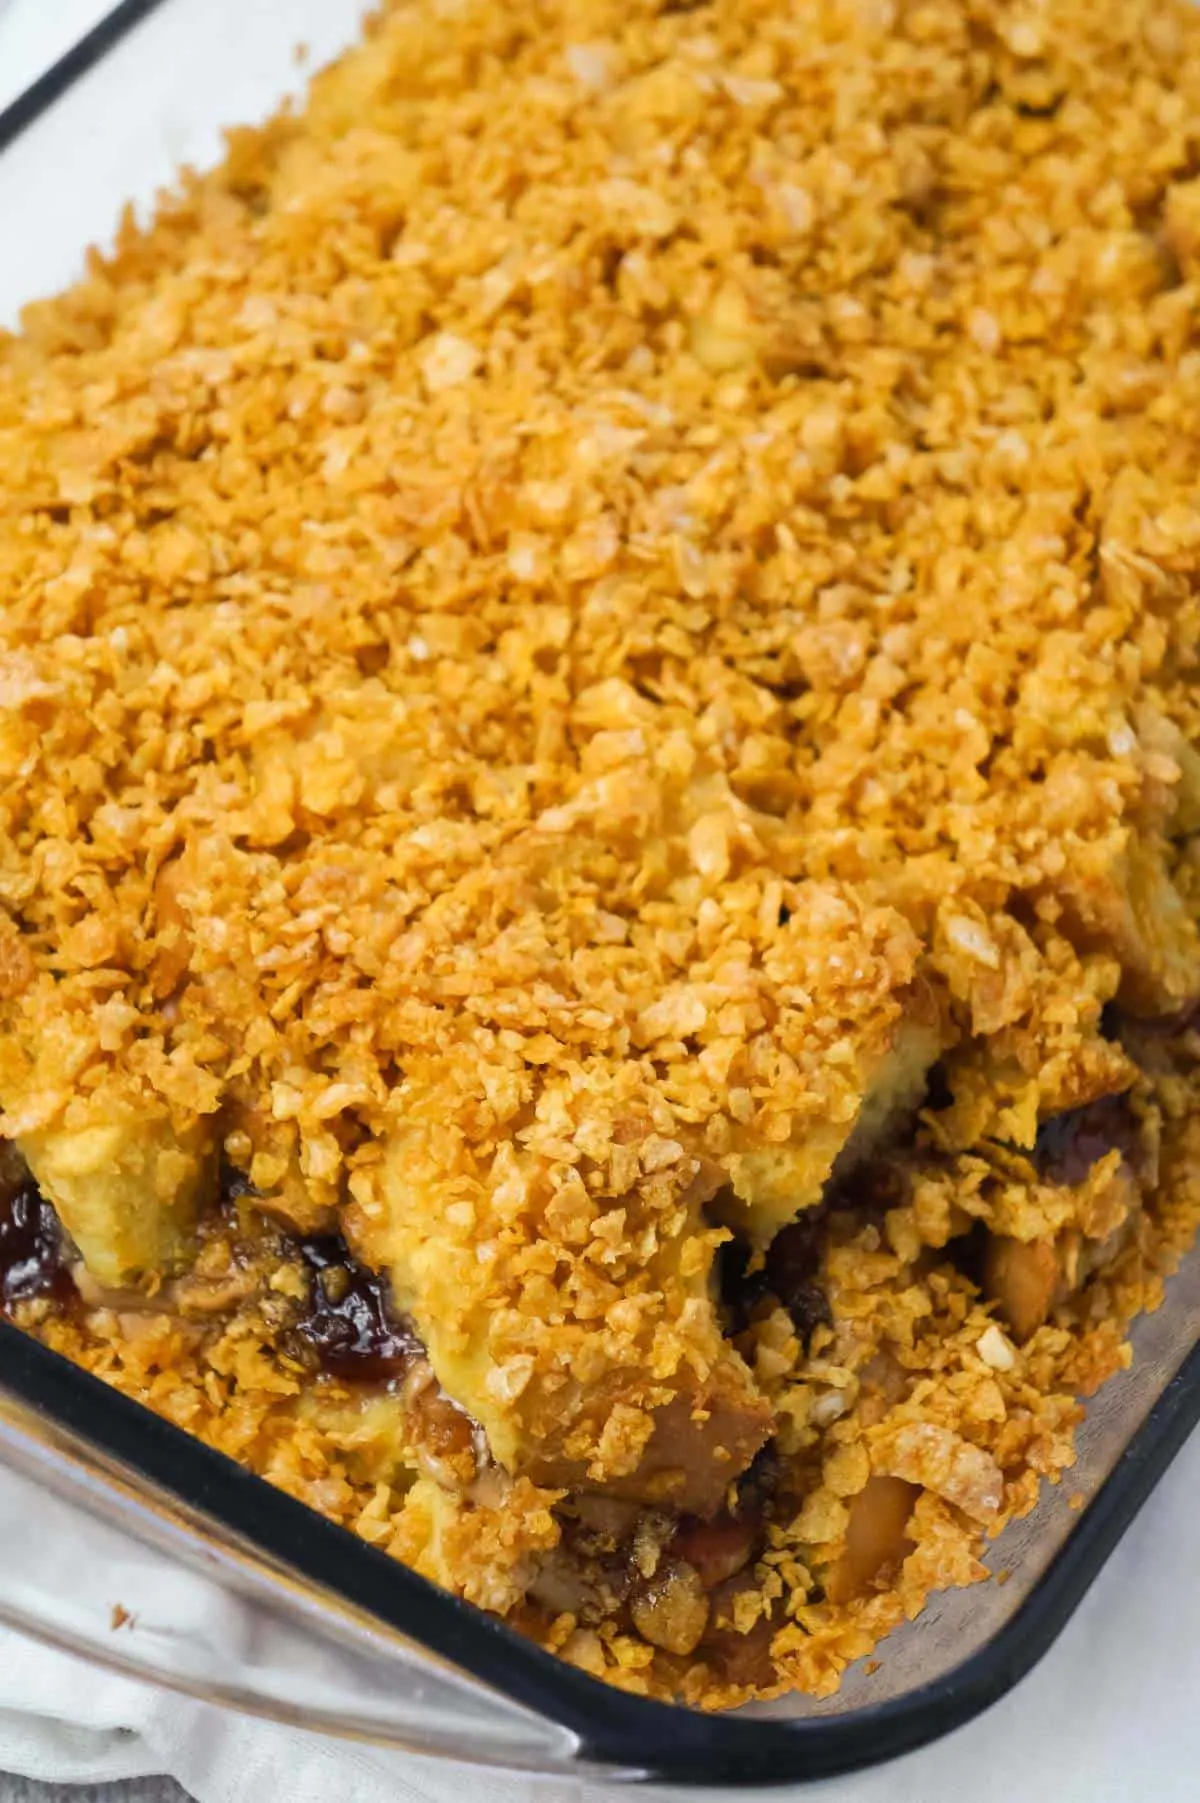 Peanut Butter and Jelly French Toast Casserole is a delicious breakfast casserole made with Italian bread loaded with peanut butter and strawberry jam and coated with Frosted Flakes.